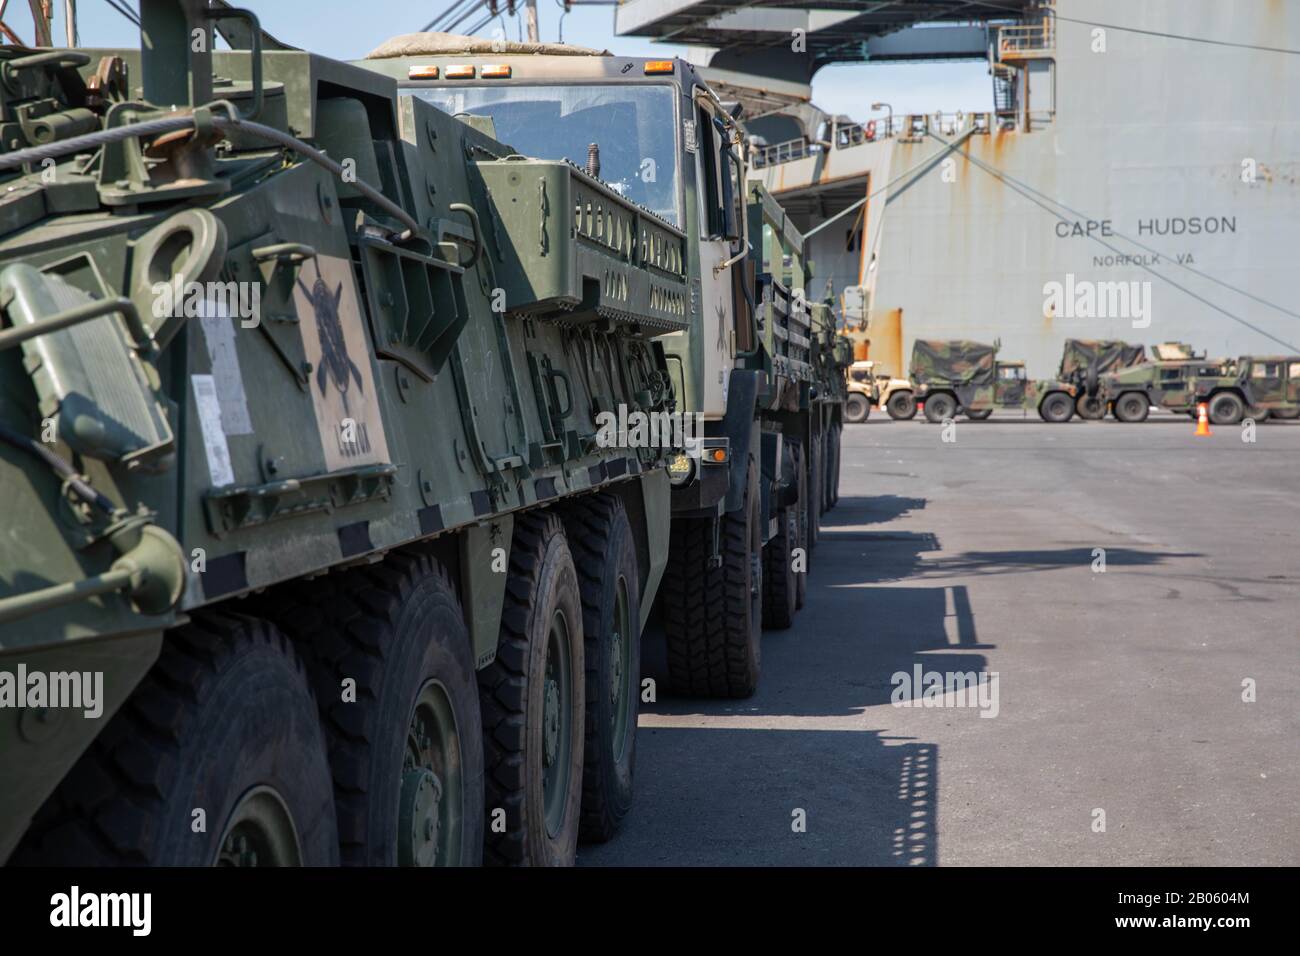 Soldiers from 2nd Infantry Brigade Combat Team, 25th Infantry Division, prepare military equipment and vehicles Feb. 17, 2020, at Chuk Samet, Thailand. Over 700 vehicles, containers and pieces of equipment were offloaded from Maritime Sealift Command M/V Cape Hudson (T-AKR 5066) in support of exercise Cobra Gold 20 and movements aligning with U.S. Army Pacific's program, 'Pacific Pathways,' in explaining Army's engagement in the Pacific region. Stock Photo